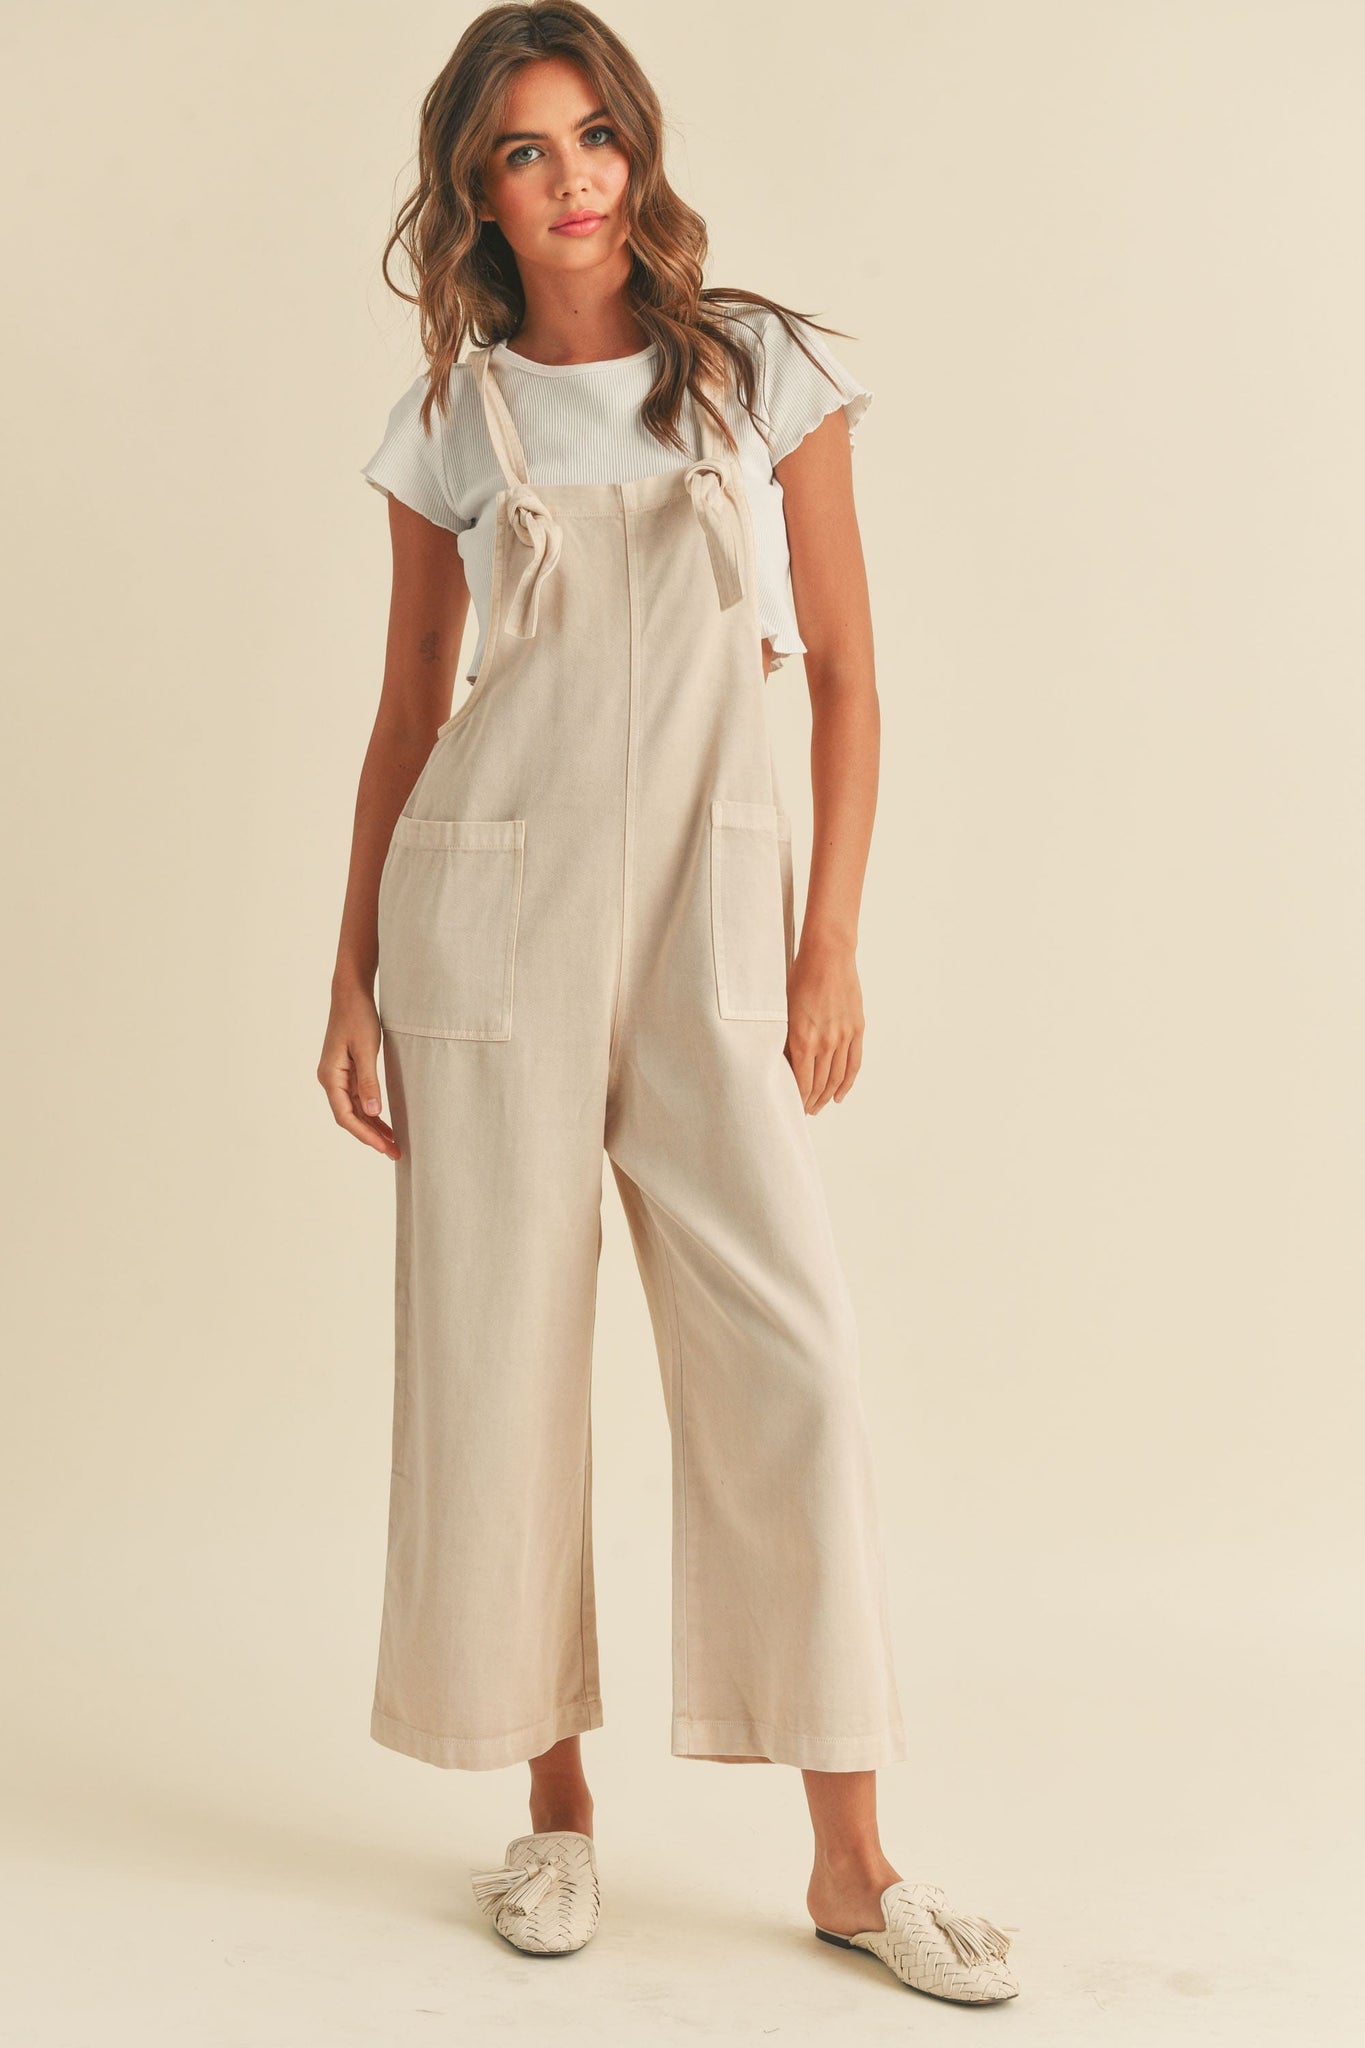 Introducing the Tencel Washed Jumpsuit, your go-to for the ultimate effortless vibe! Relaxed and oh-so-comfy, you'll be ready to take on any activity with ease. 